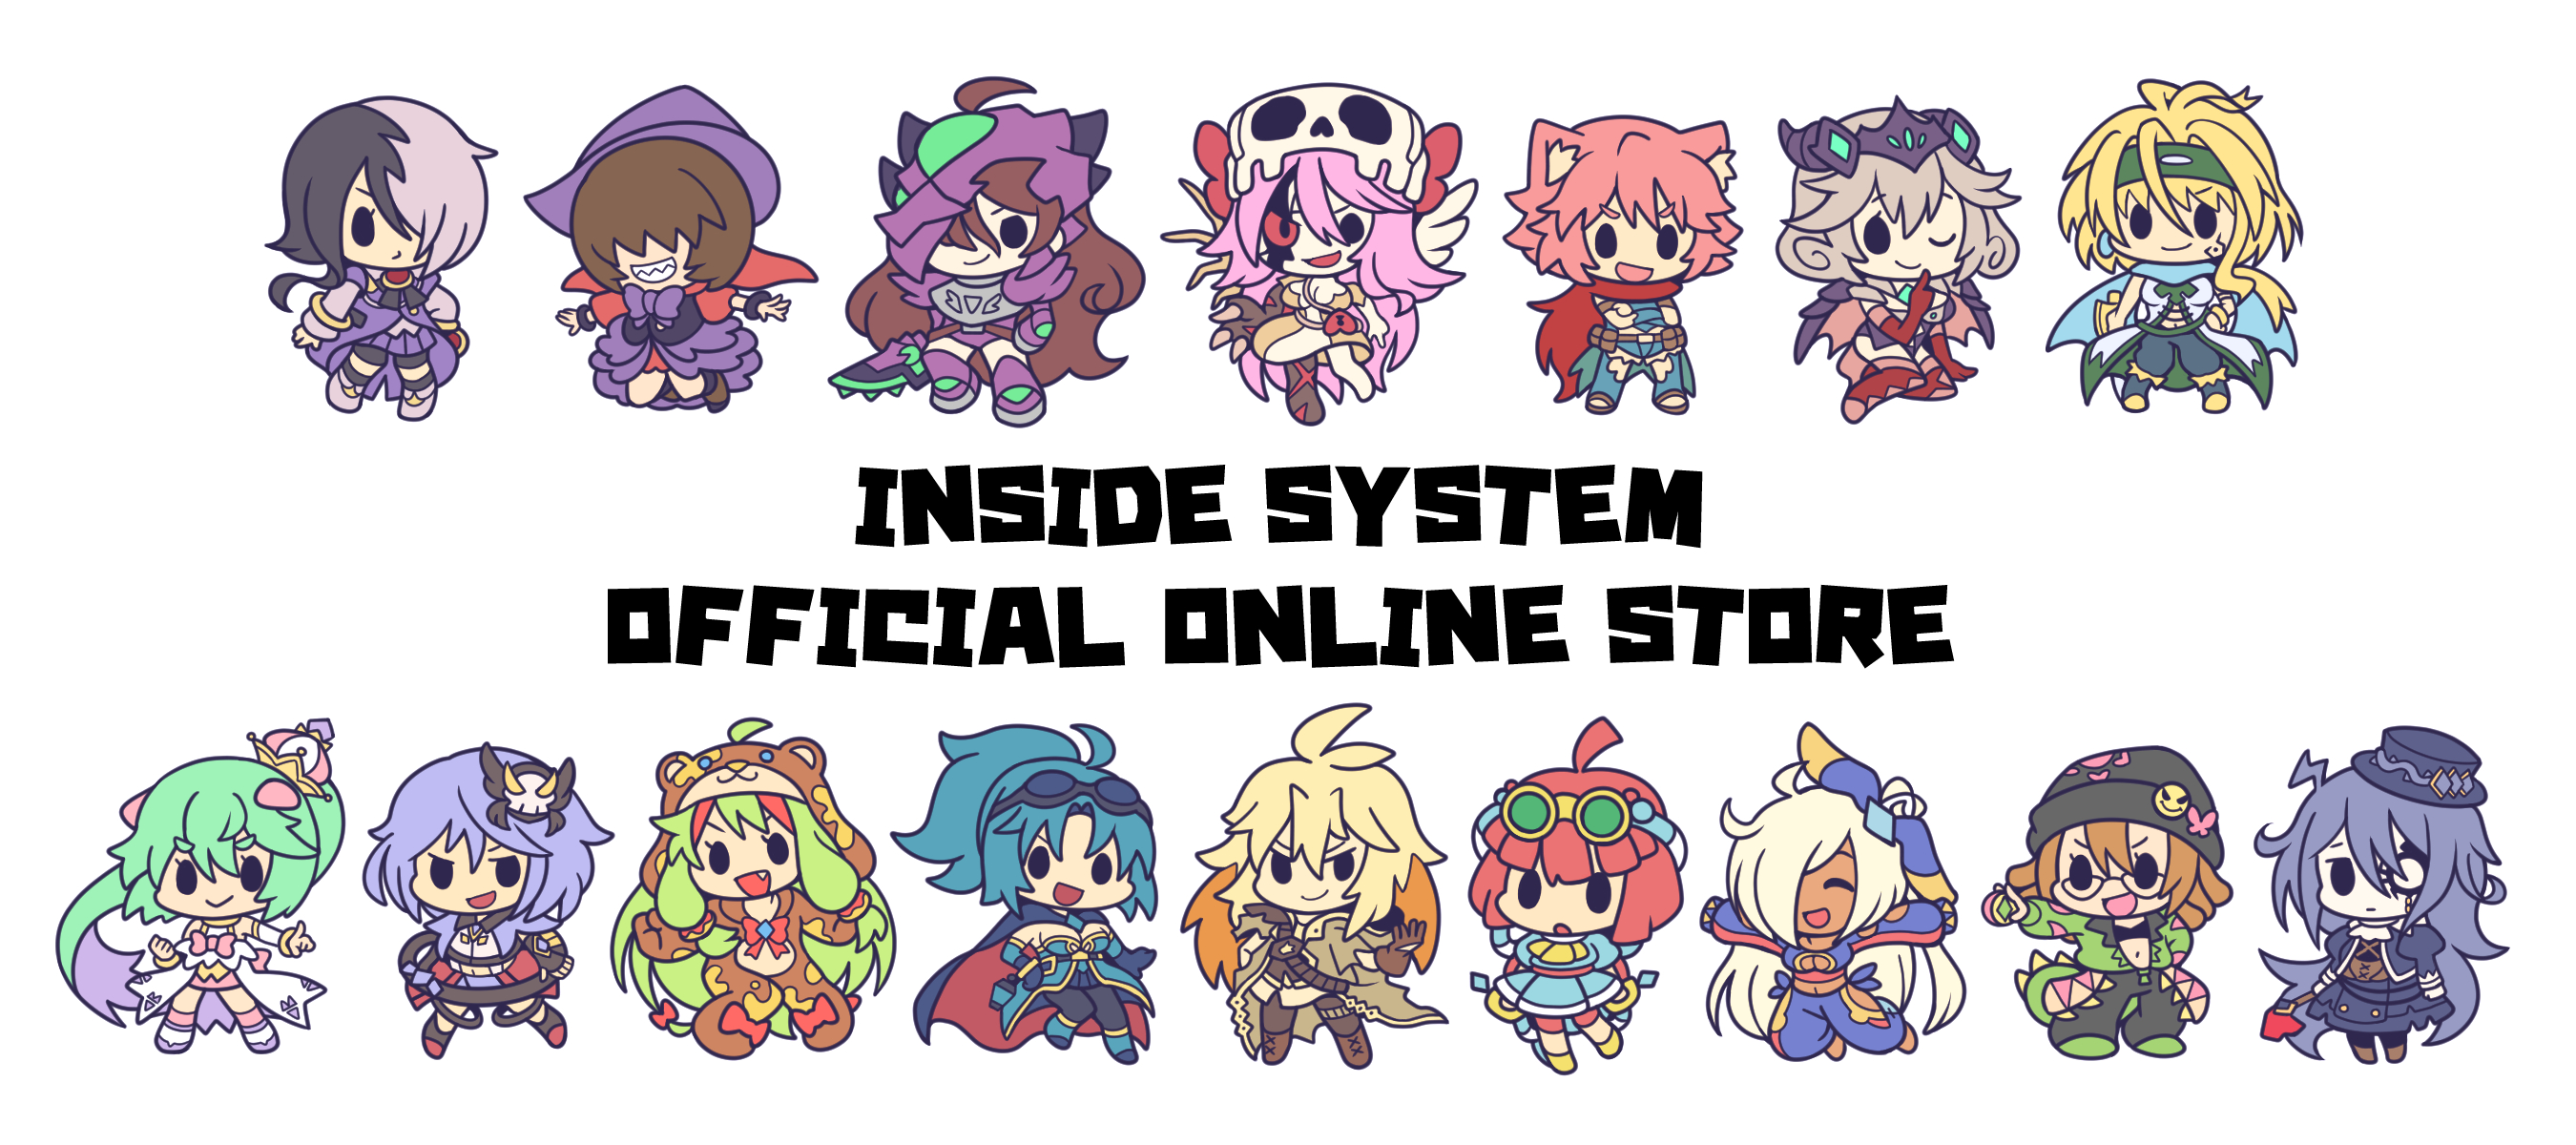 INSIDE SYSTEM OFFICIAL ONLINE STORE